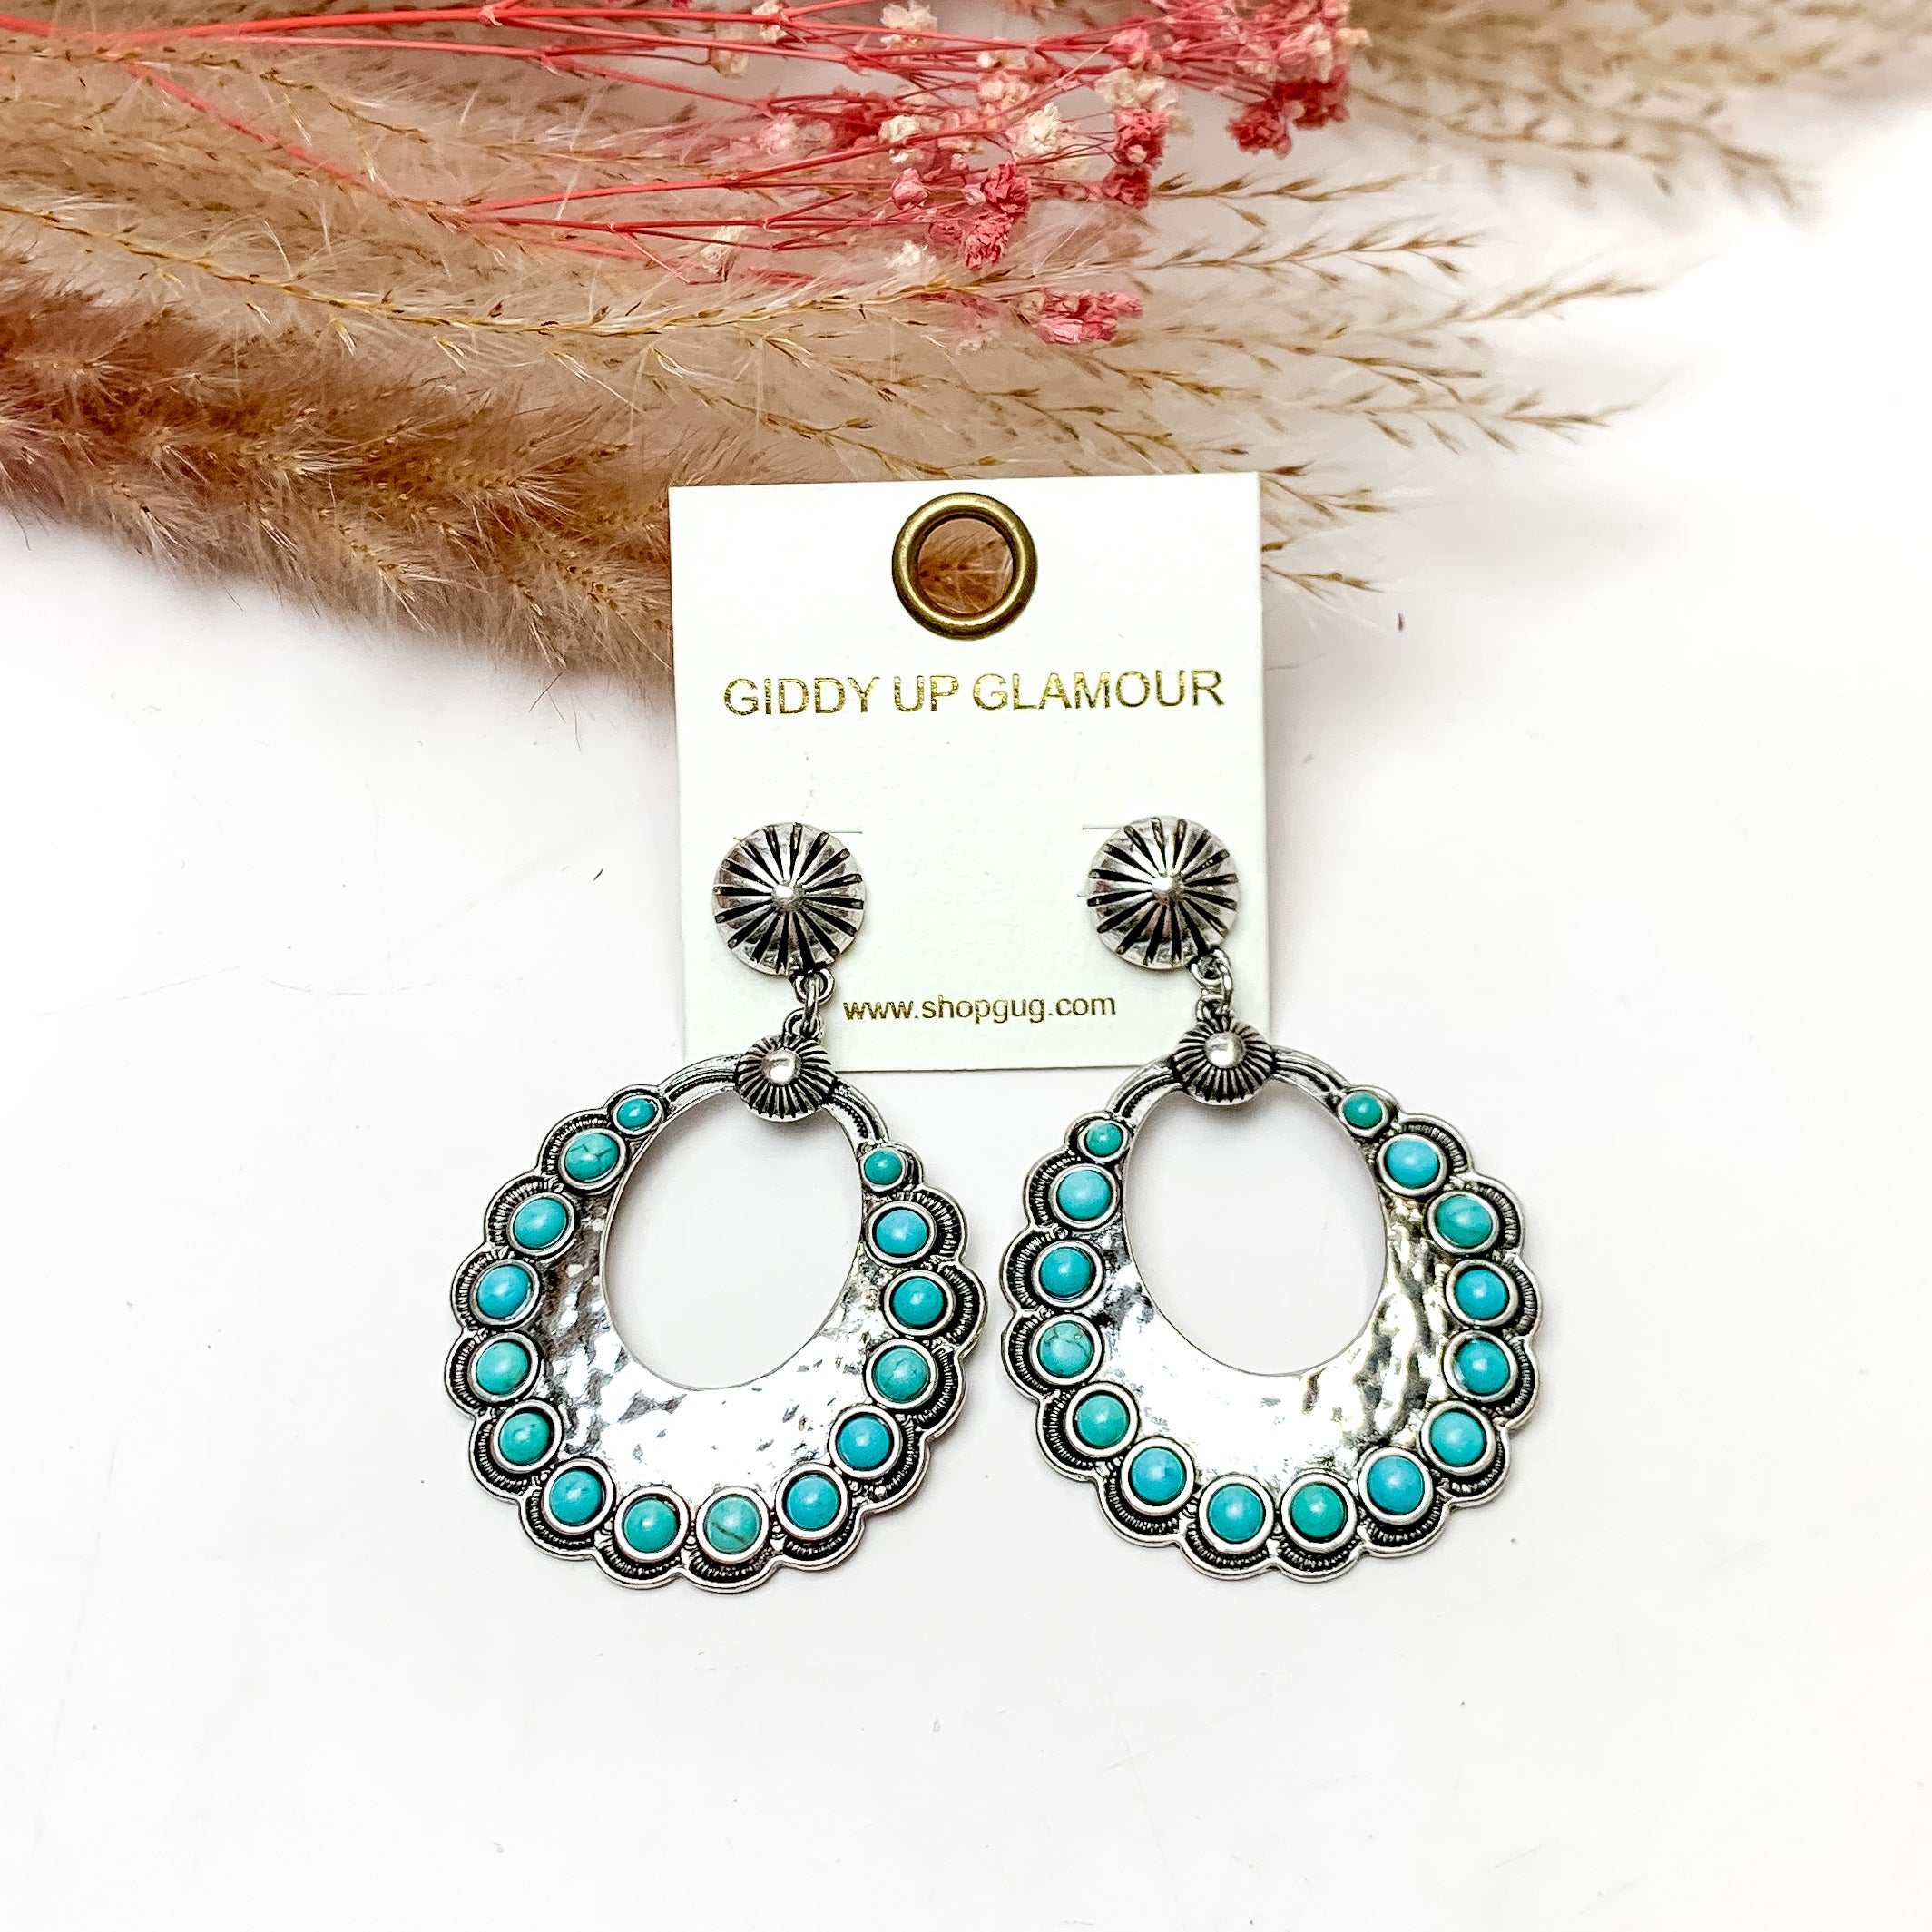 Western Open Silver Tone Earrings With Turquoise Stones. These earrings are pictured on a white background with plants behind for decoration.